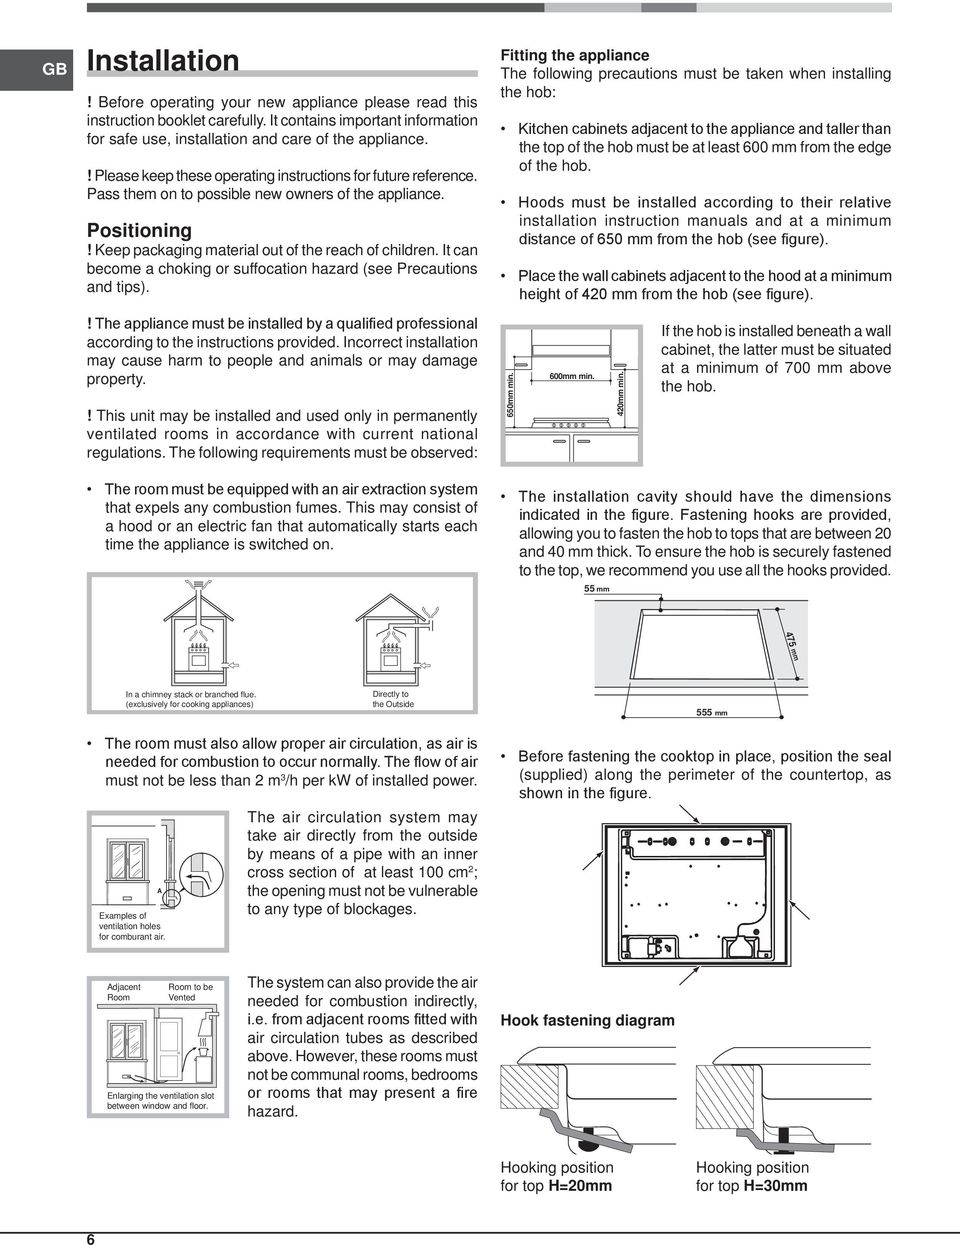 It can become a choking or suffocation hazard (see Precautions and tips).! The appliance must be installed by a qualified professional according to the instructions provided.